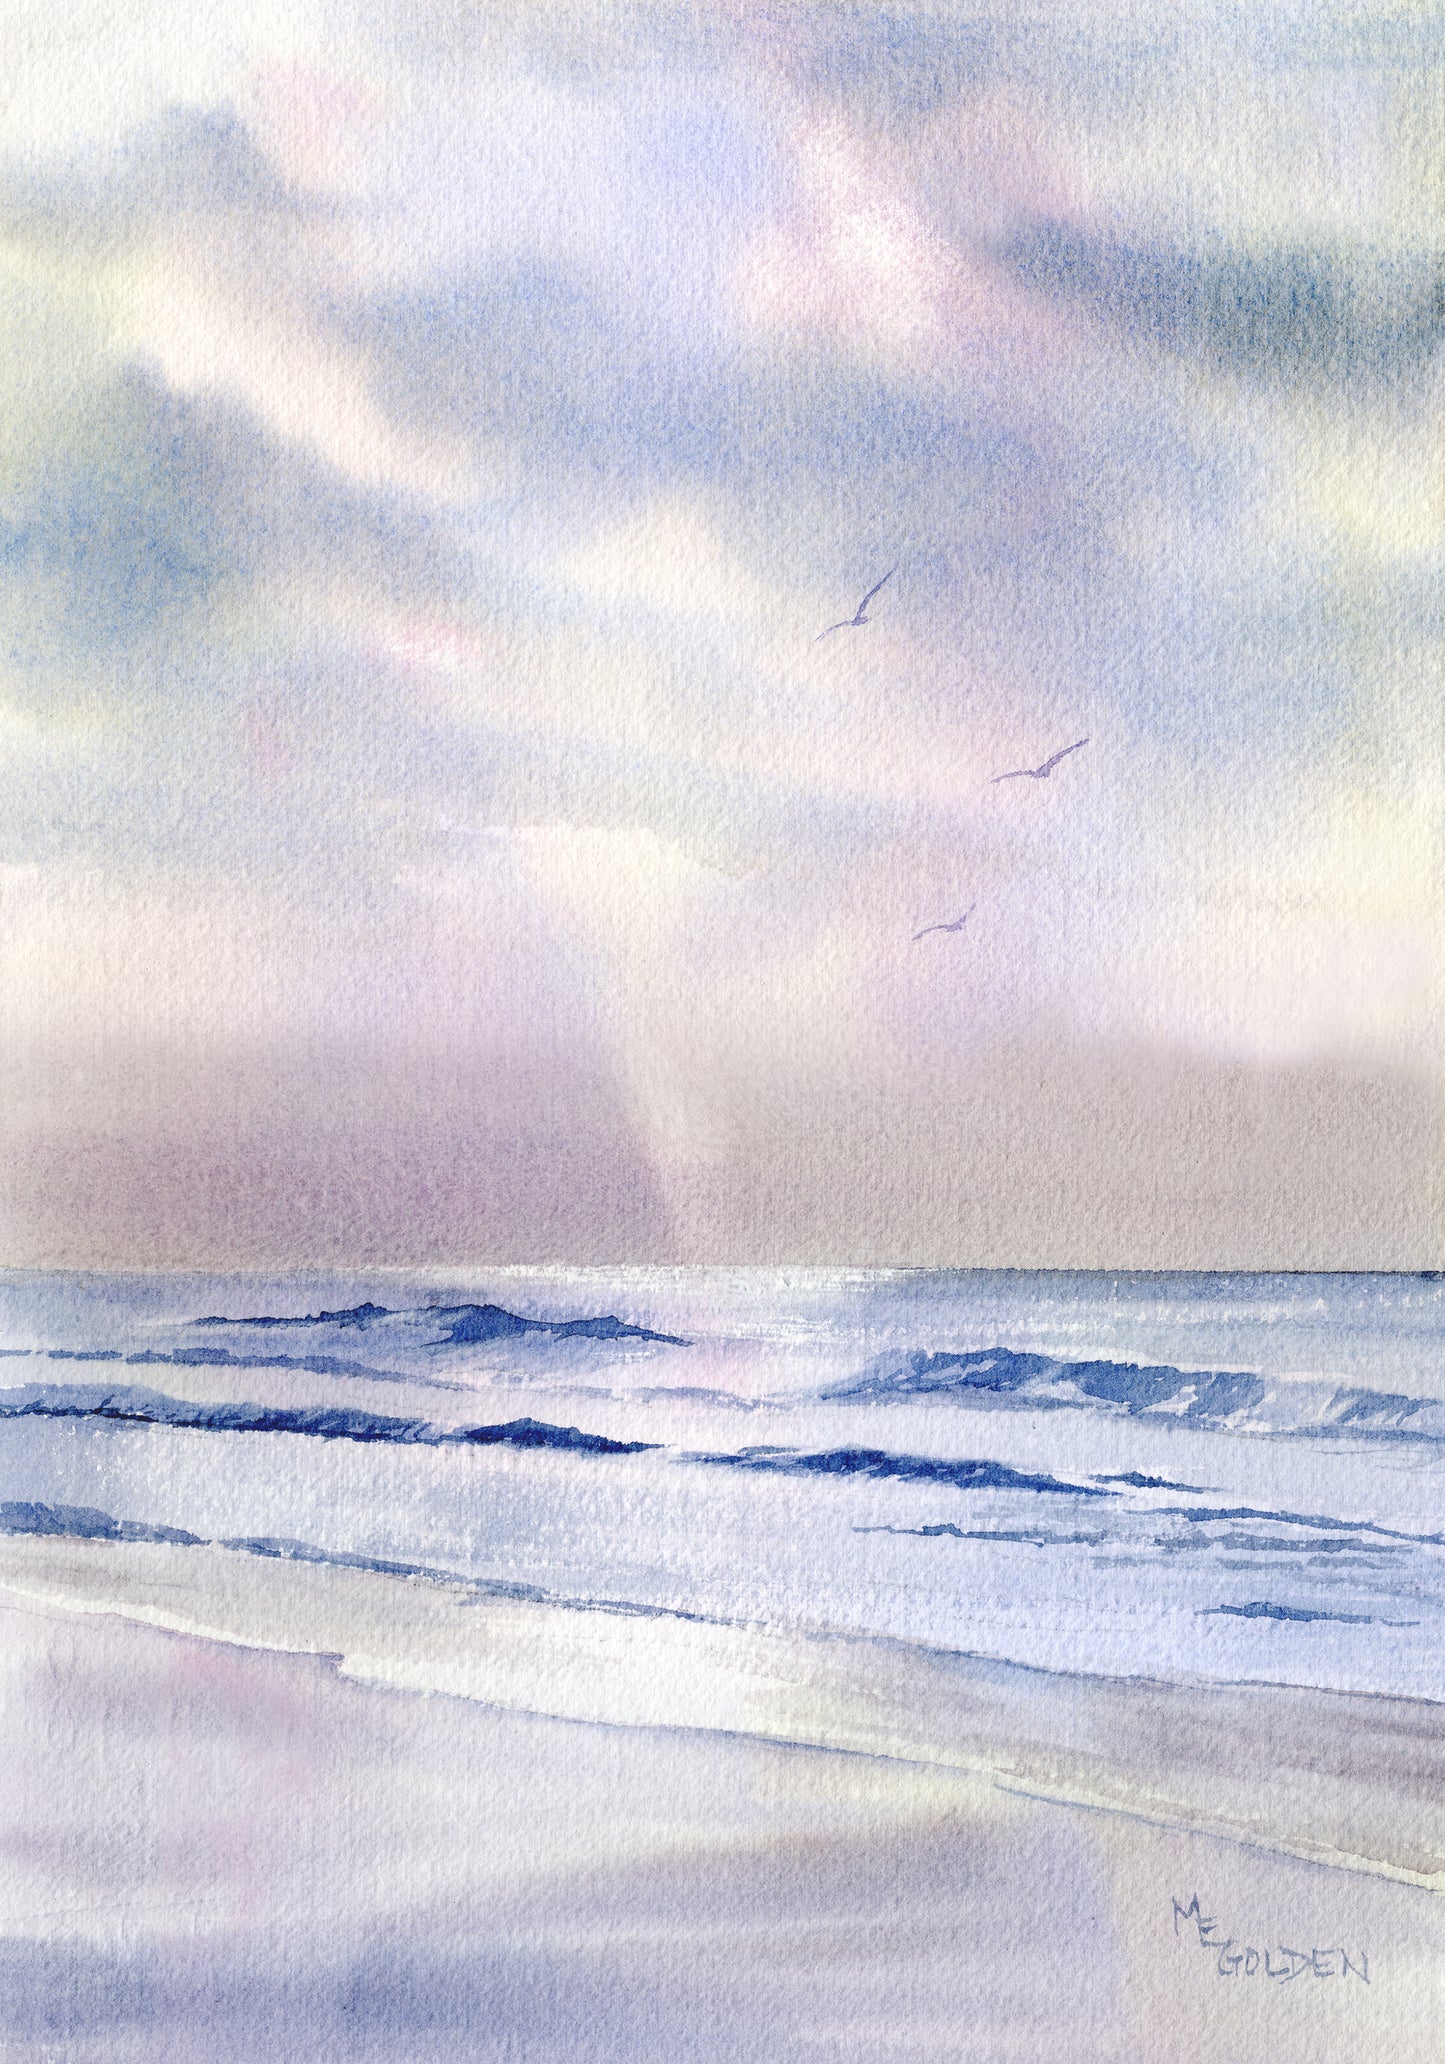 Silver Morning Seascape with waves, clouds, and a ray of light Giclée Print